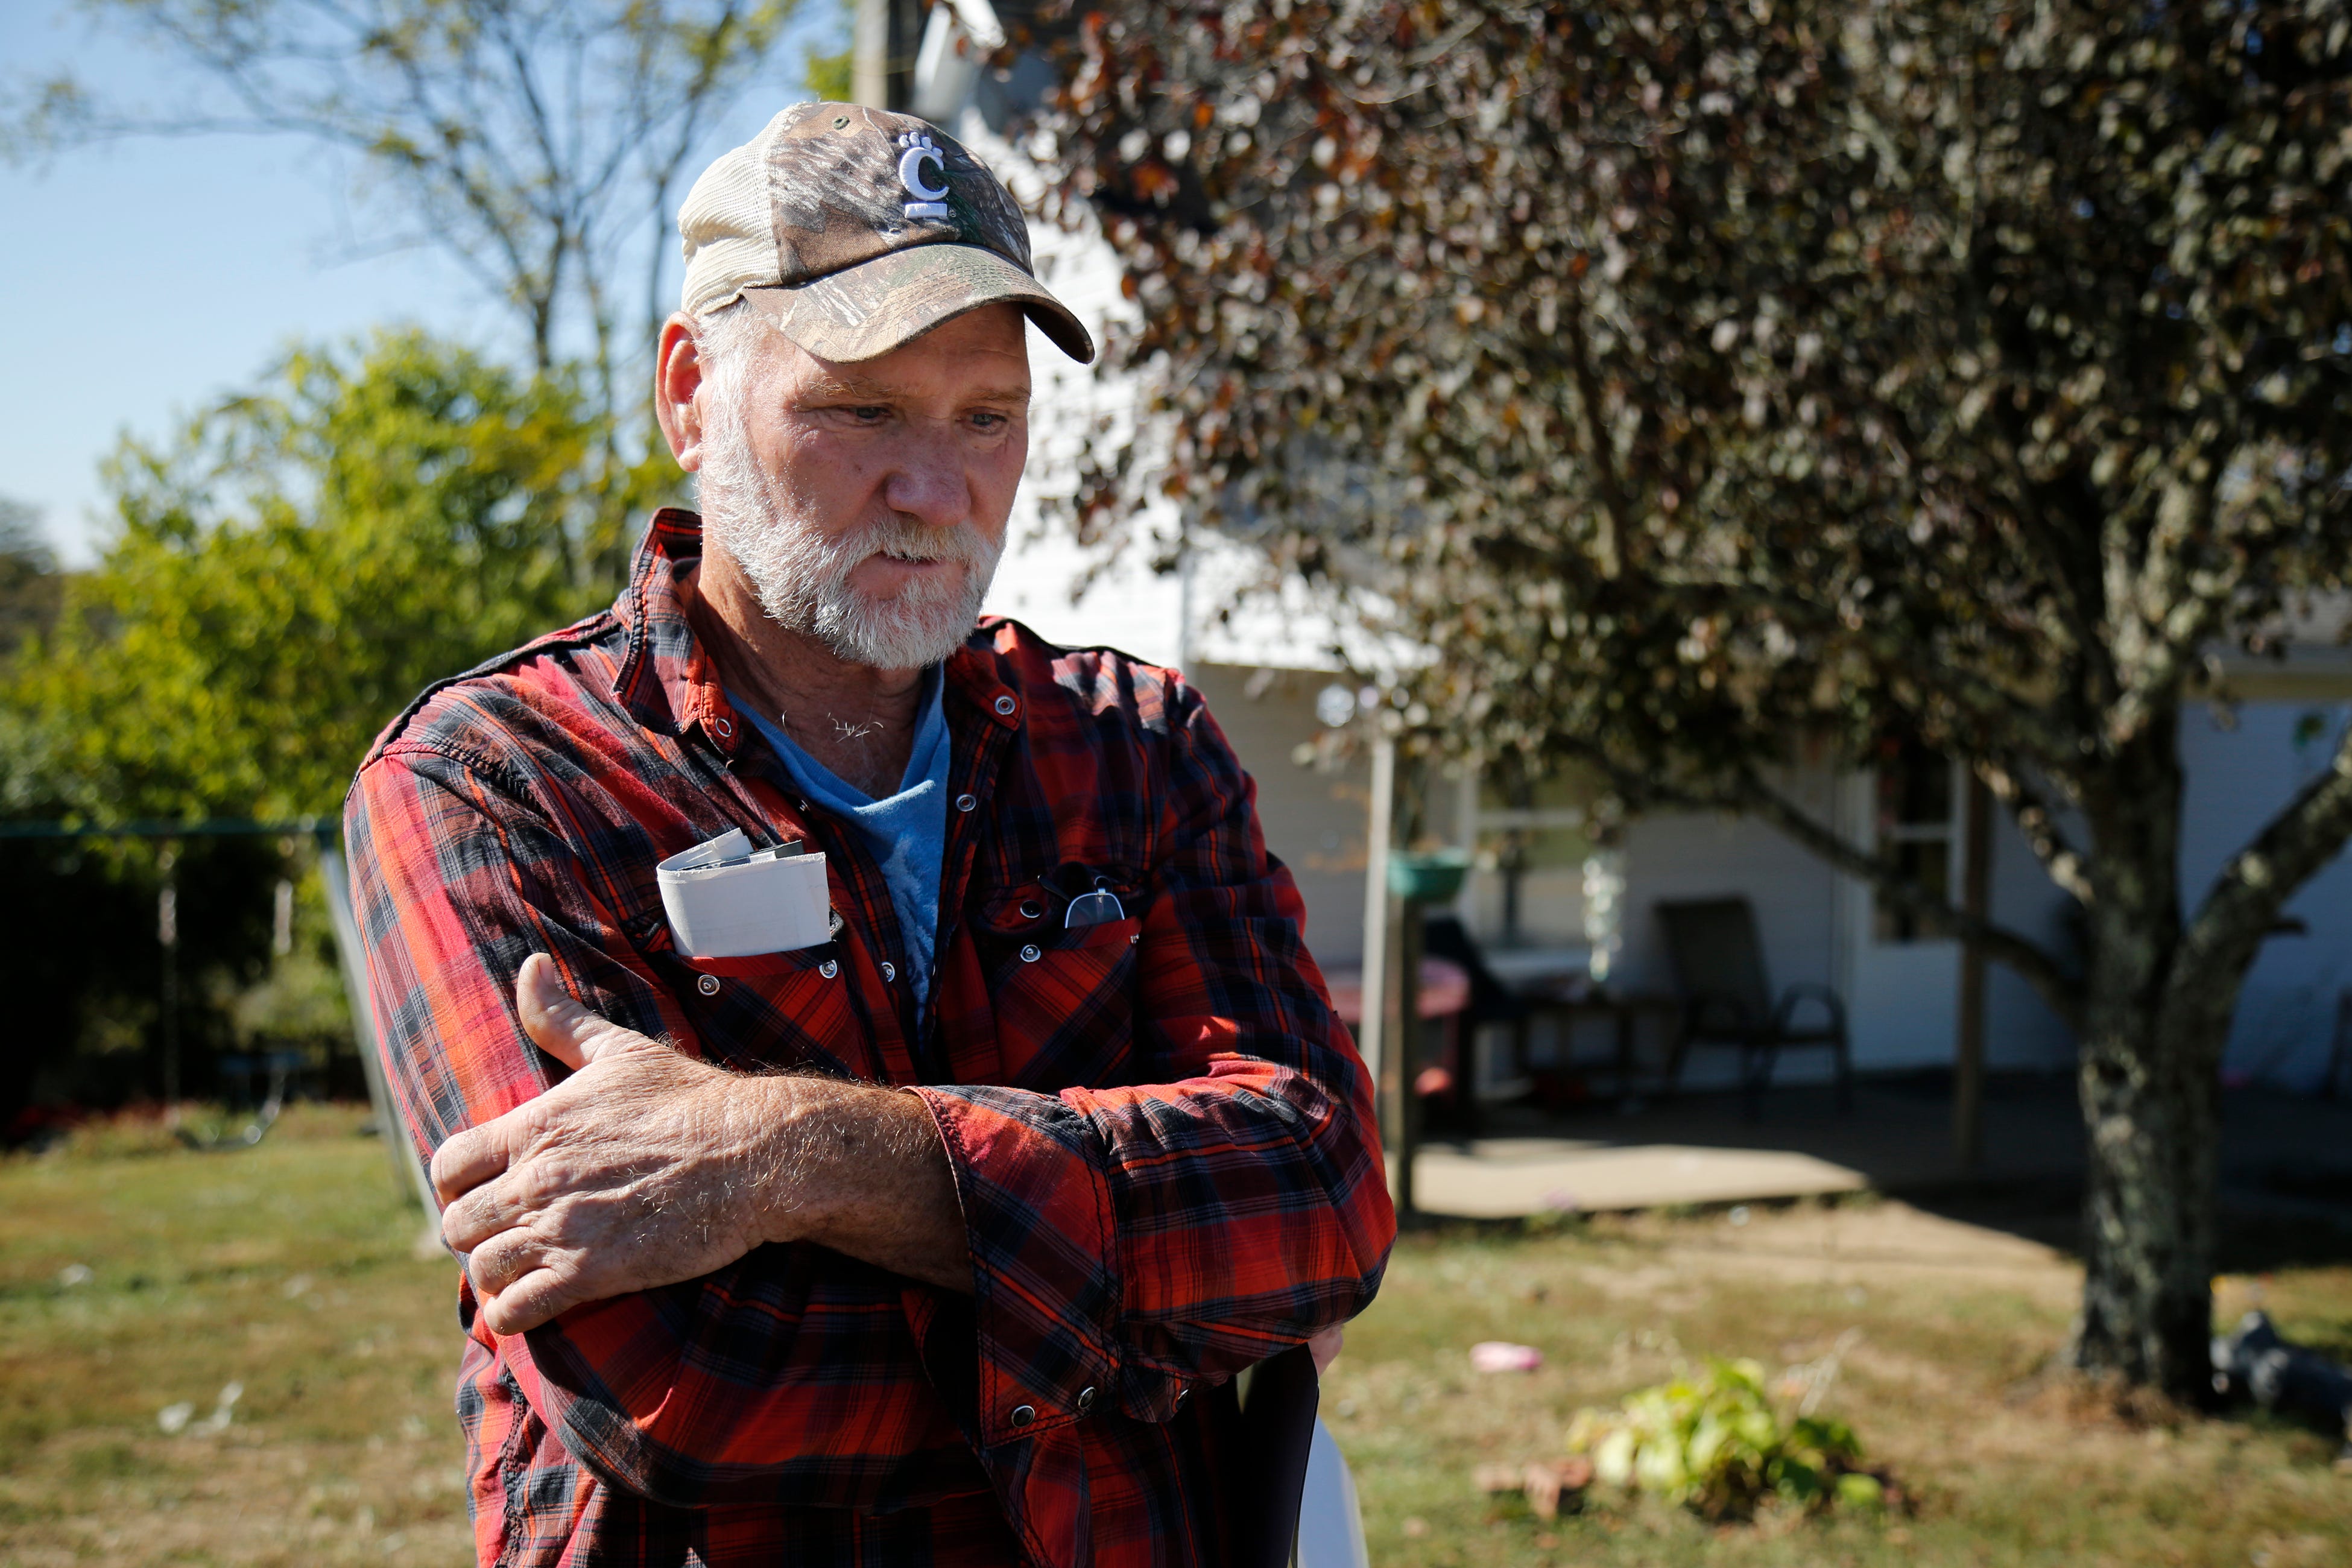 Arnold Hughes outside his home in the unincorporated town of DeMossville.  After years of manual labor, he lost his job in 2016 as his body started to break down. He’s been unable to find another job since.